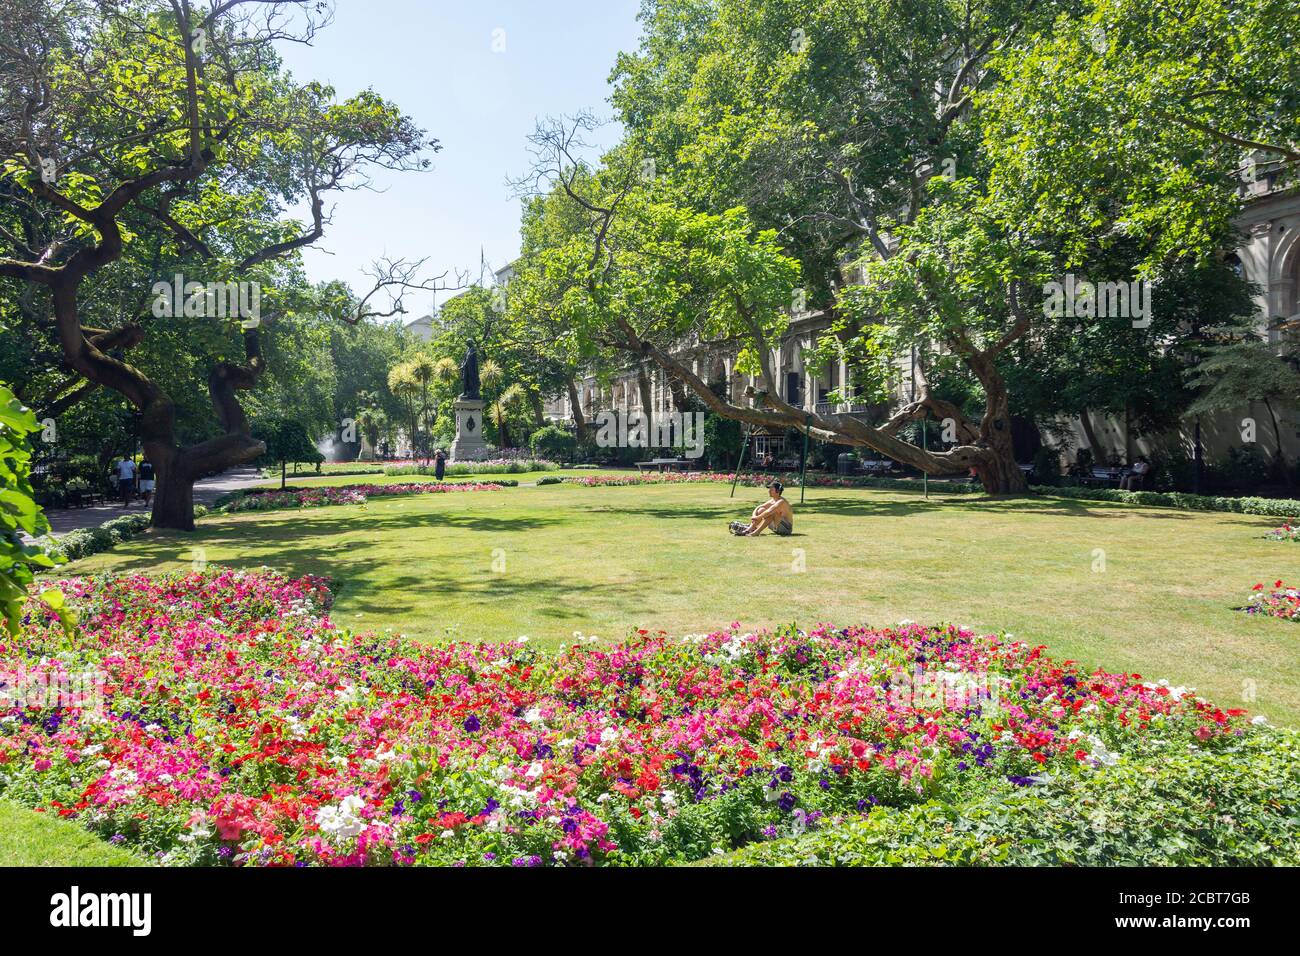 Whitehall Gardens, Victoria Embankment, City of Westminster, Greater London, England, Regno Unito Foto Stock